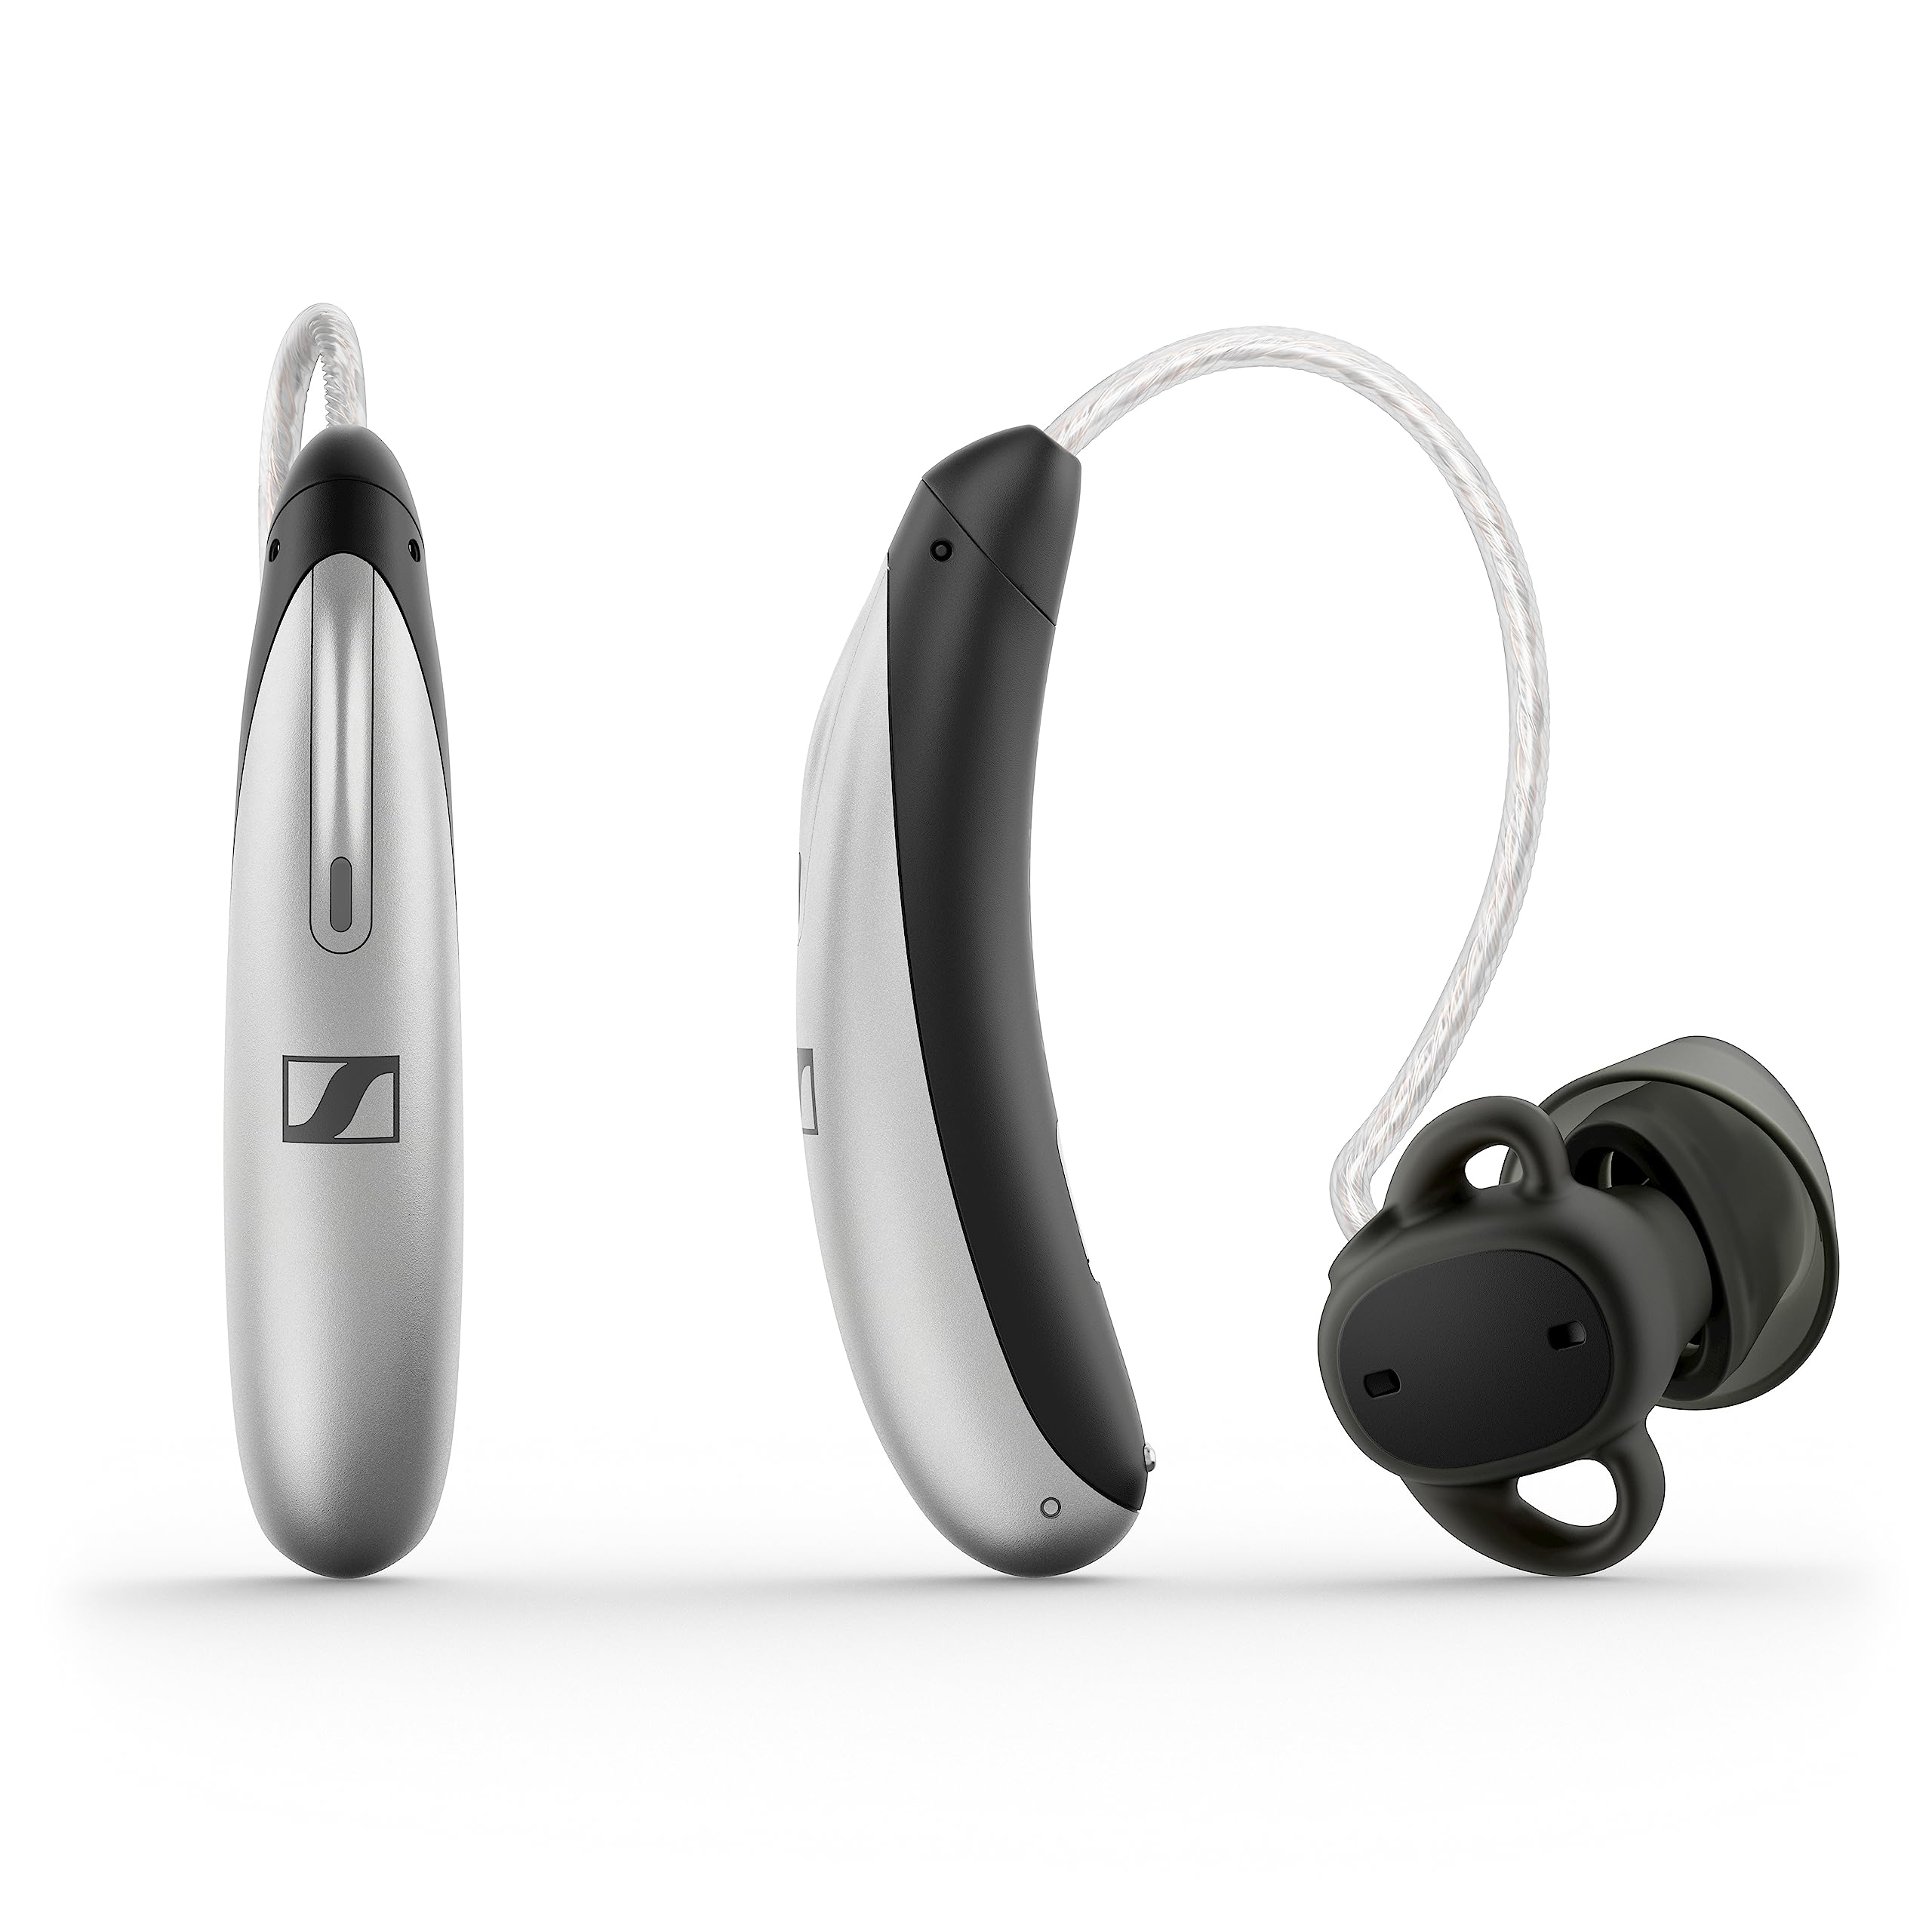 Sennheiser All-Day Clear Slim - OTC Self-Fitting Hearing Aid for All-Day Wear and Bluetooth Streaming - For Mild to Moderate Hearing Loss - FDA Cleared - Light Grey